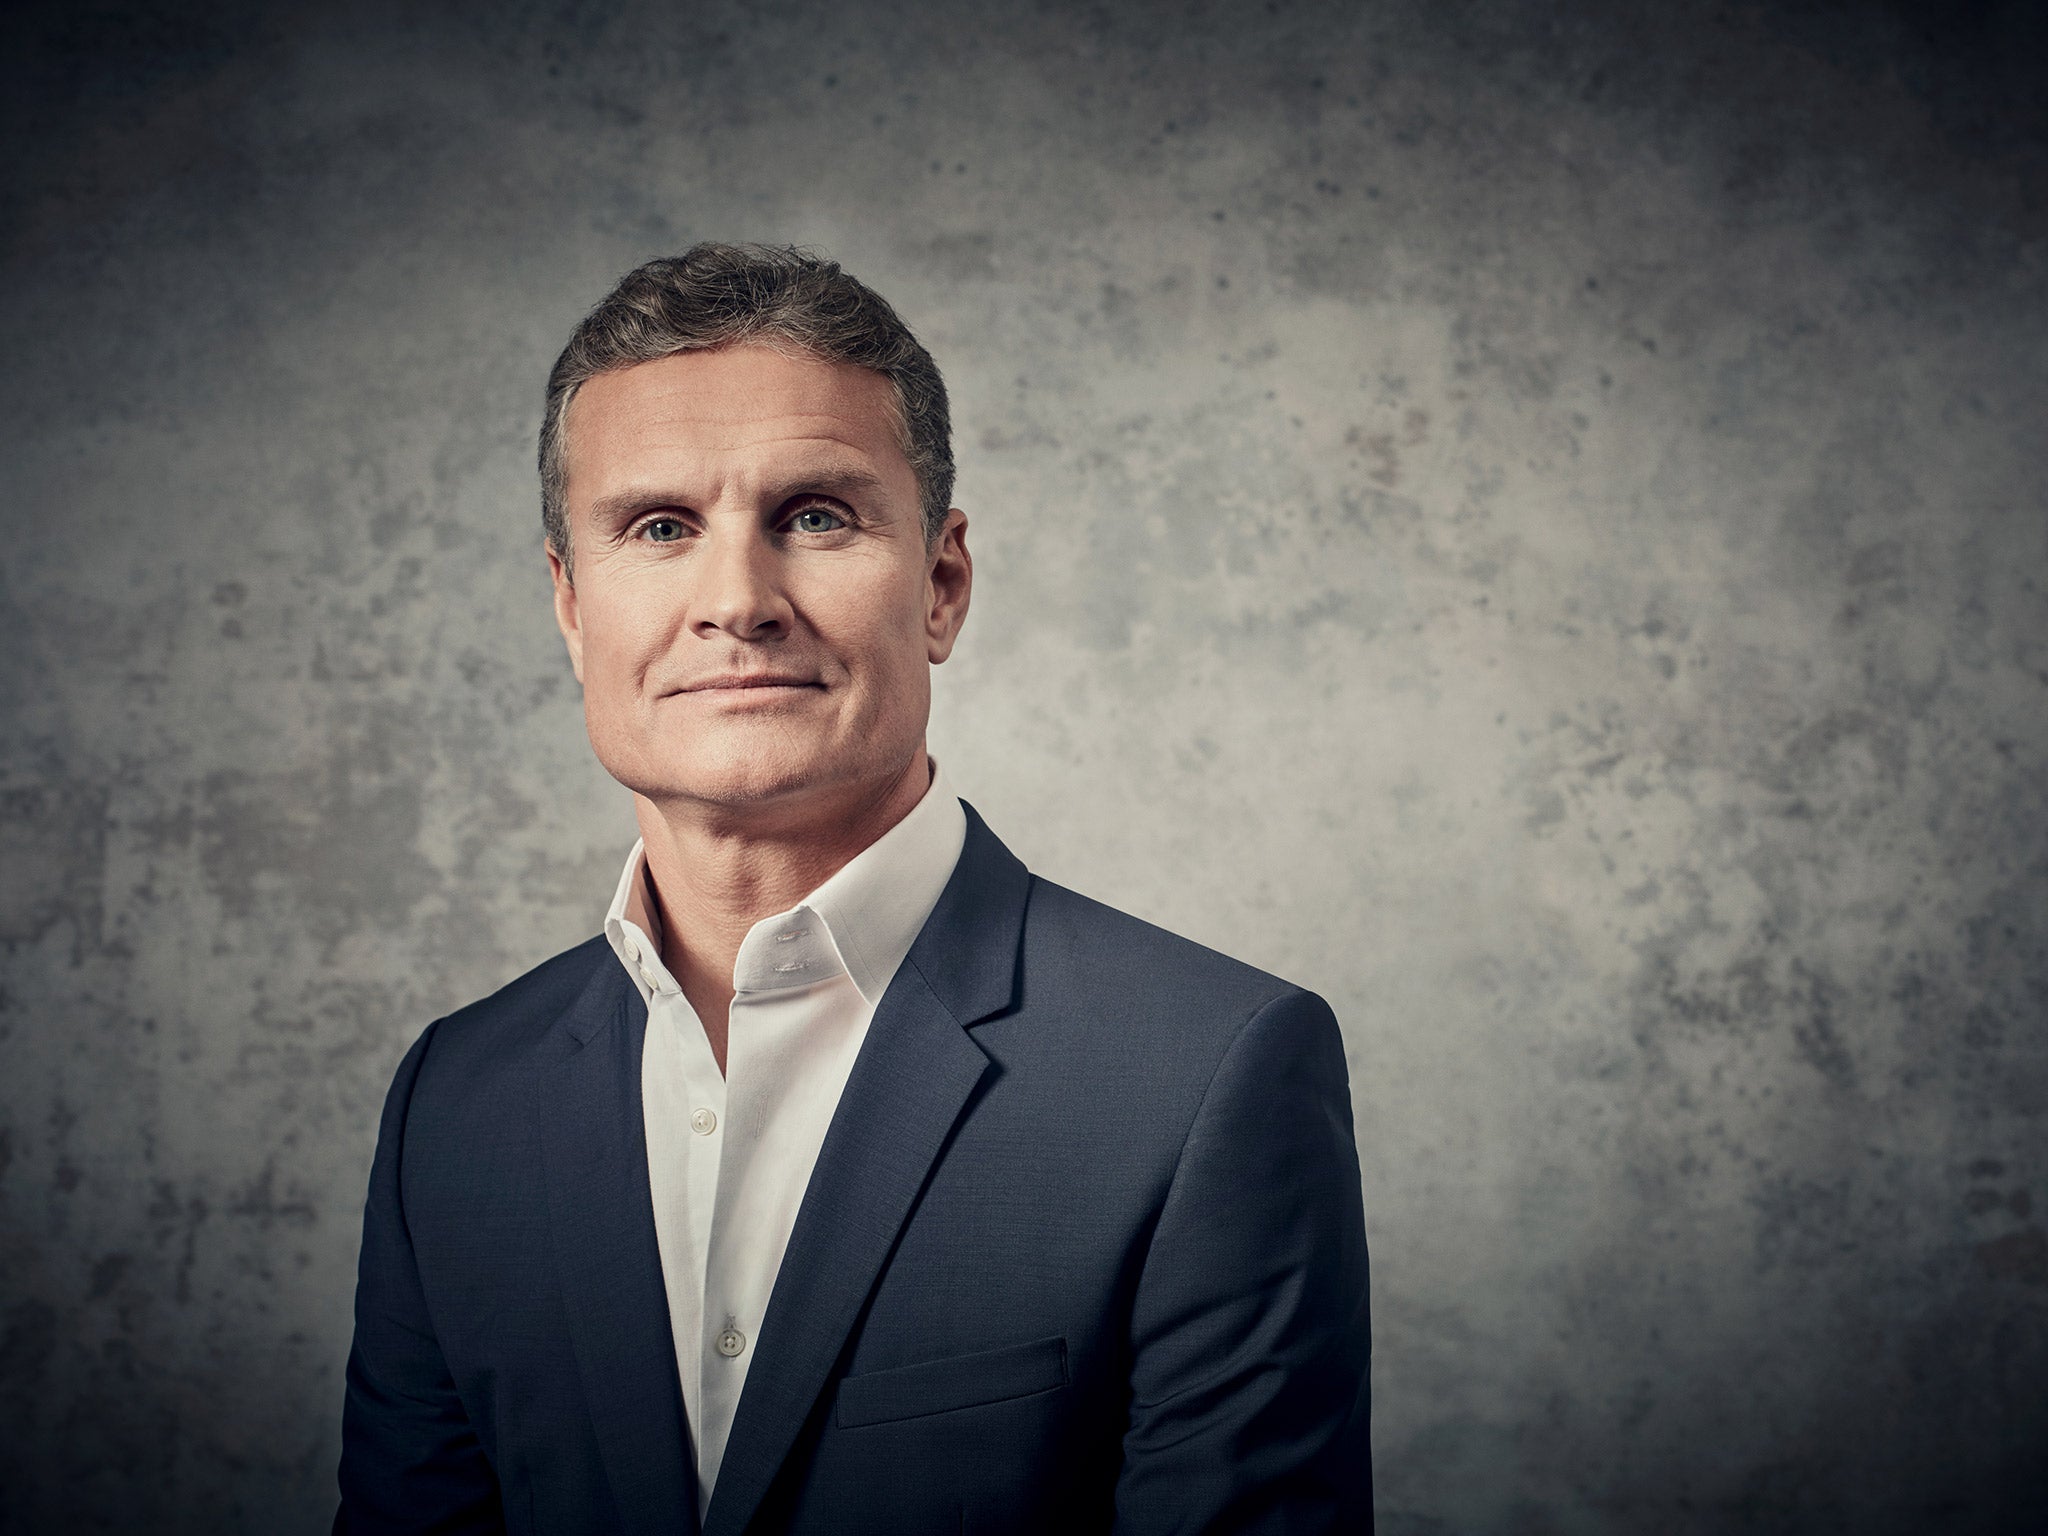 David Coulthard won 13 races in a 15-year Formula One career